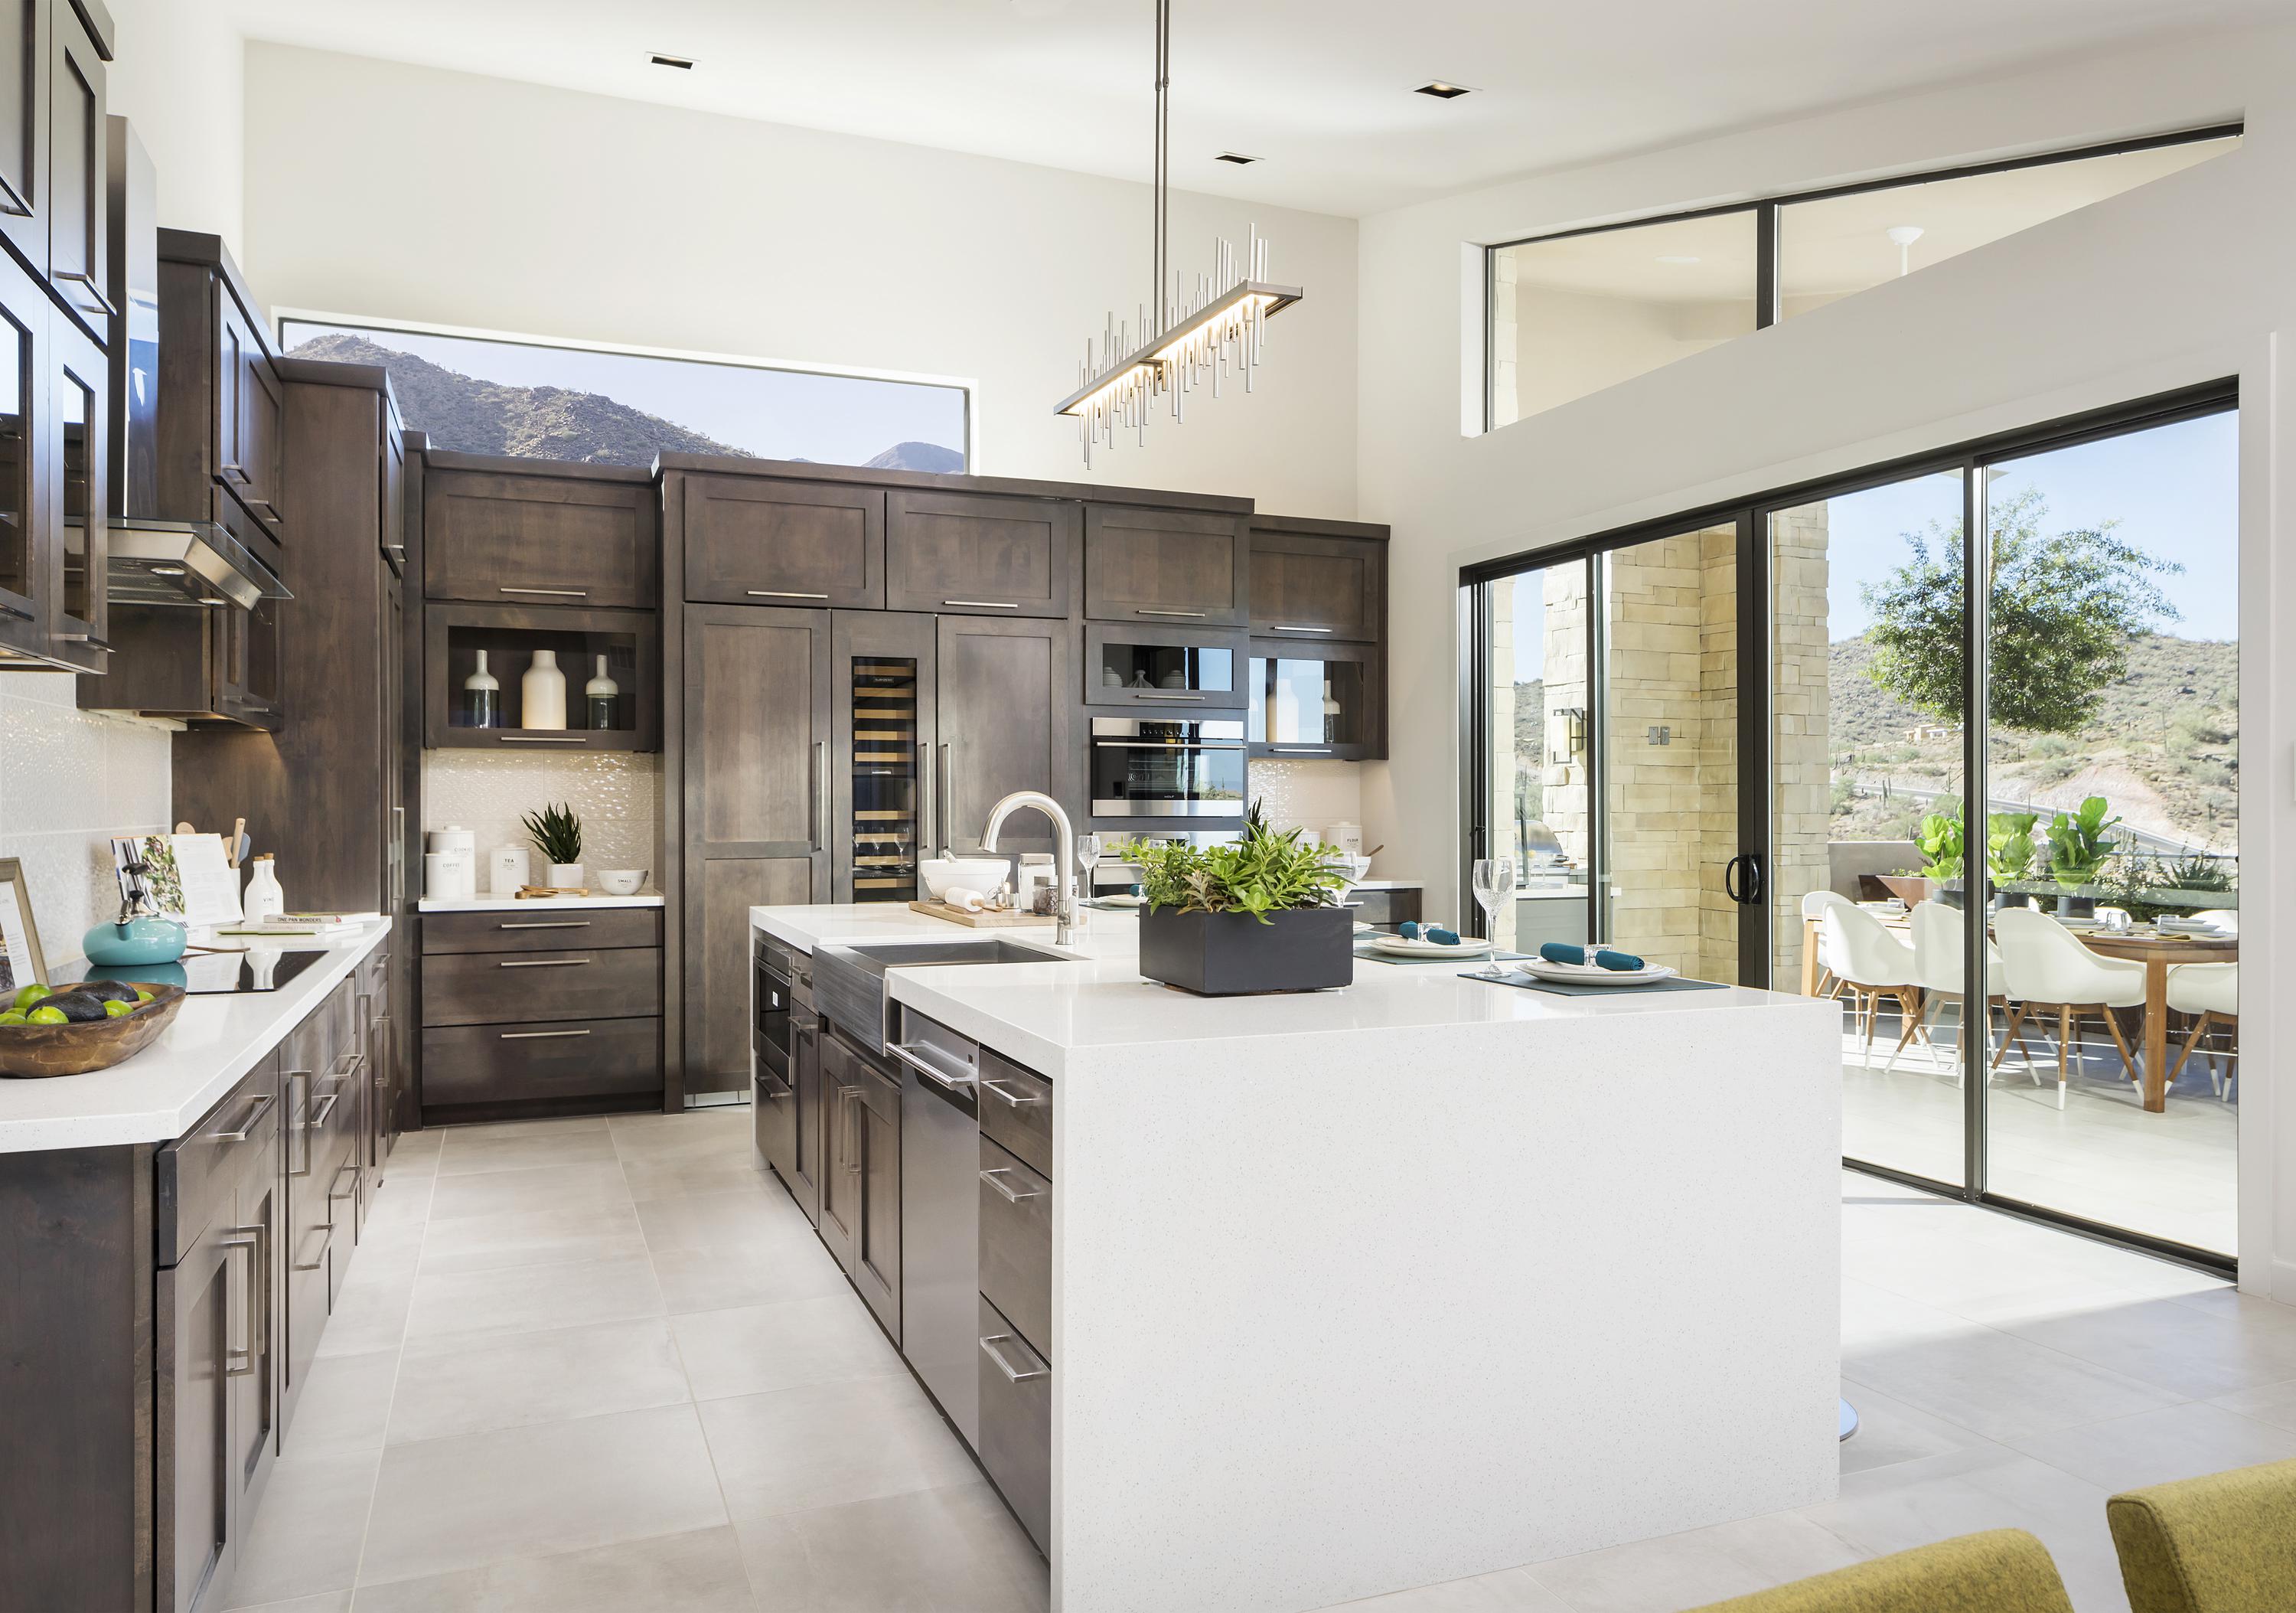  Beautiful Kitchen Designs for Today s Lifestyles Build 